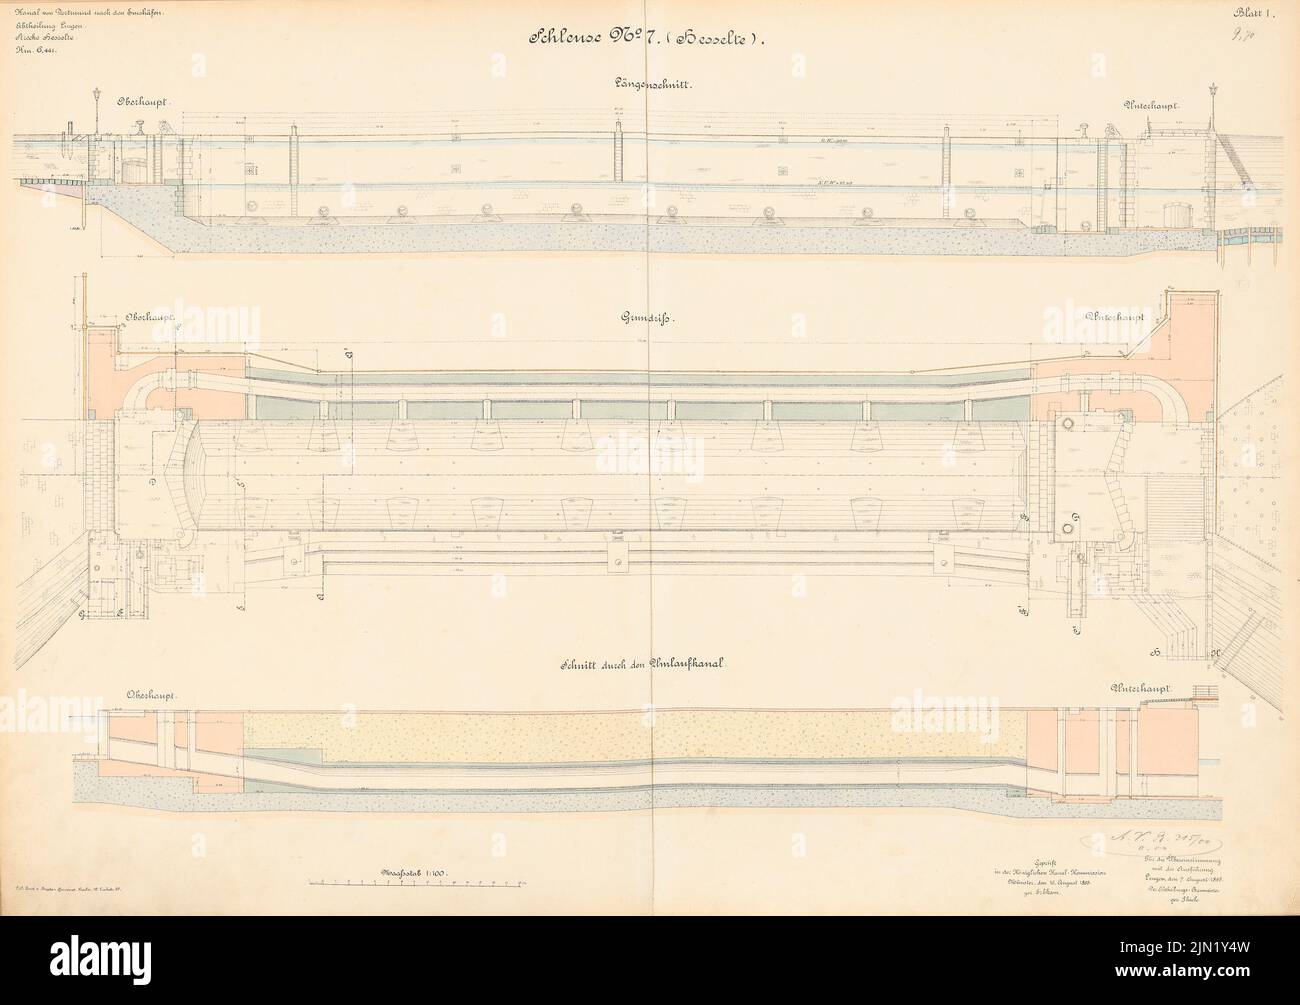 N.N., Dortmund-Ems-Canal. Schleuse, Hesselte: floor plan, cuts 1: 100. Lithograph colored on paper, 69.7 x 98.9 cm (including scan edges) N.N. : Dortmund-Ems-Kanal. Schleuse, Hesselte Stock Photo